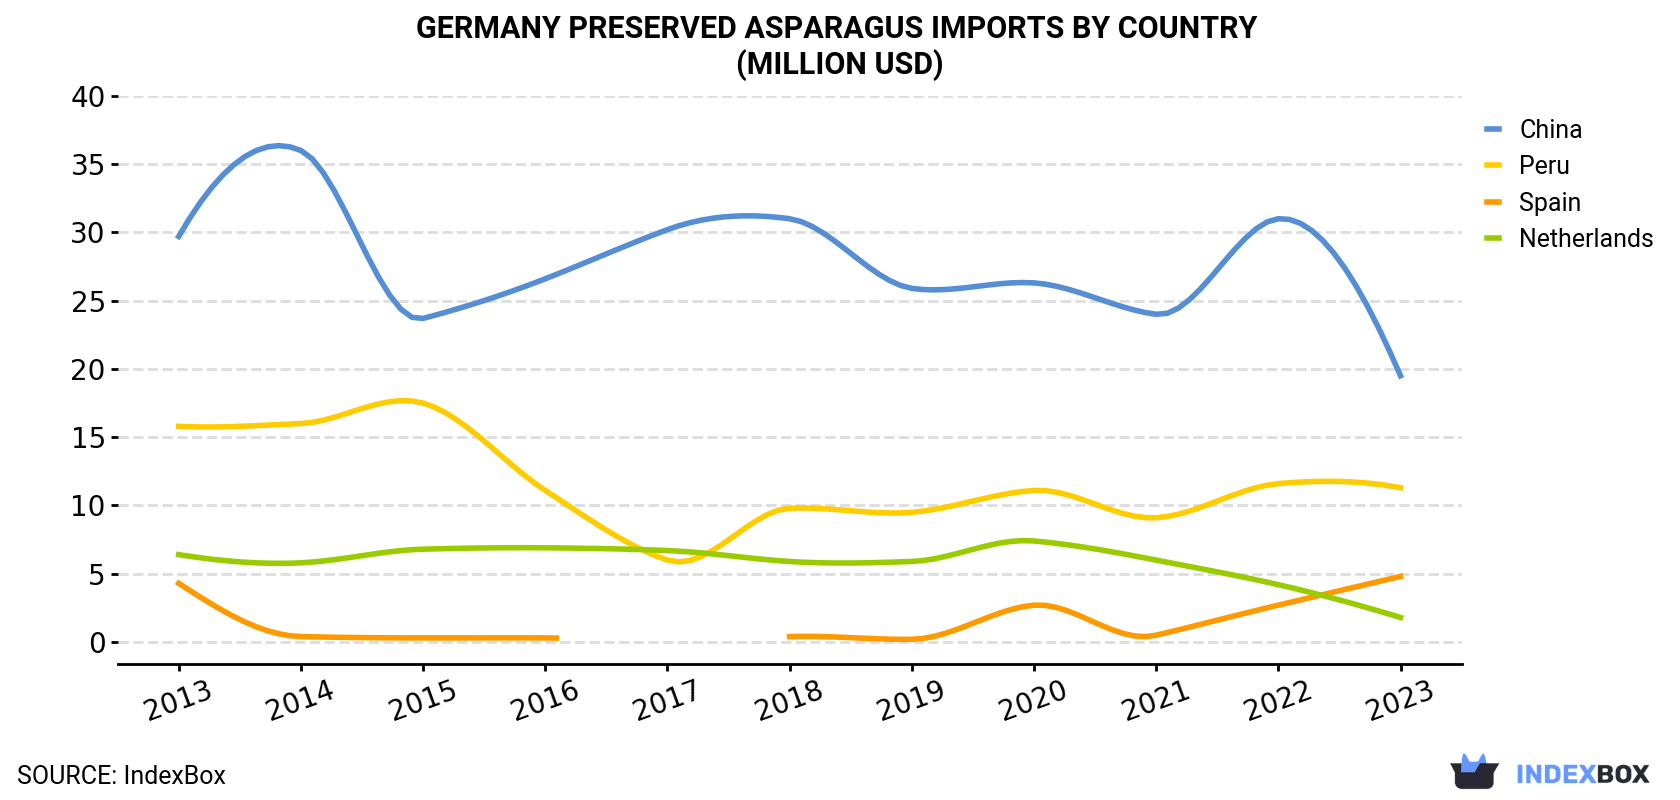 Germany Preserved Asparagus Imports By Country (Million USD)